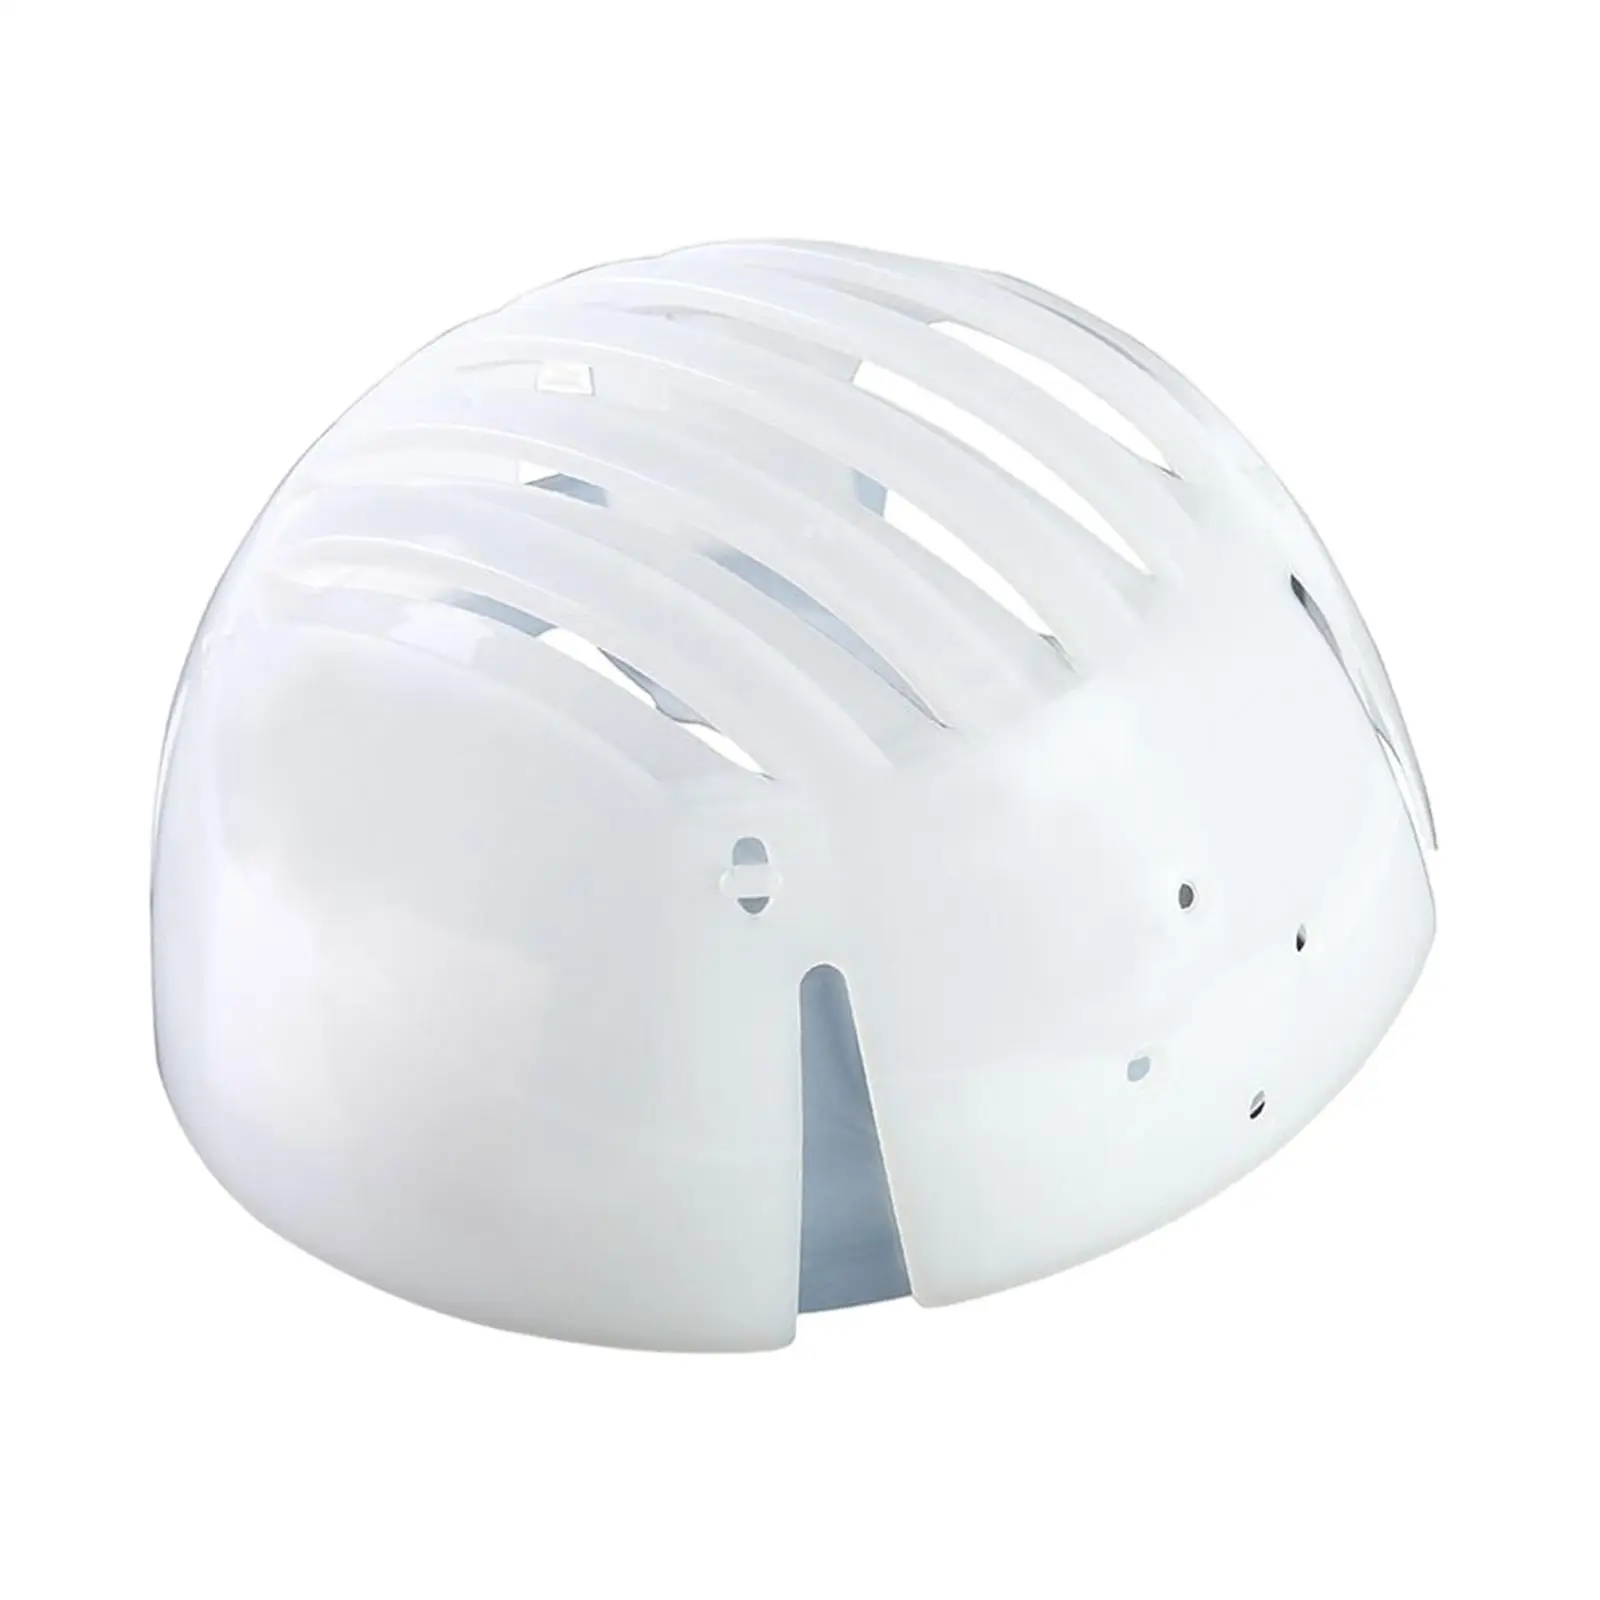 Portable Safety Helmet Protective Hat Lining Lightweight Prevent Collision Head Protection Bumper Hat Insert for Factory Sports